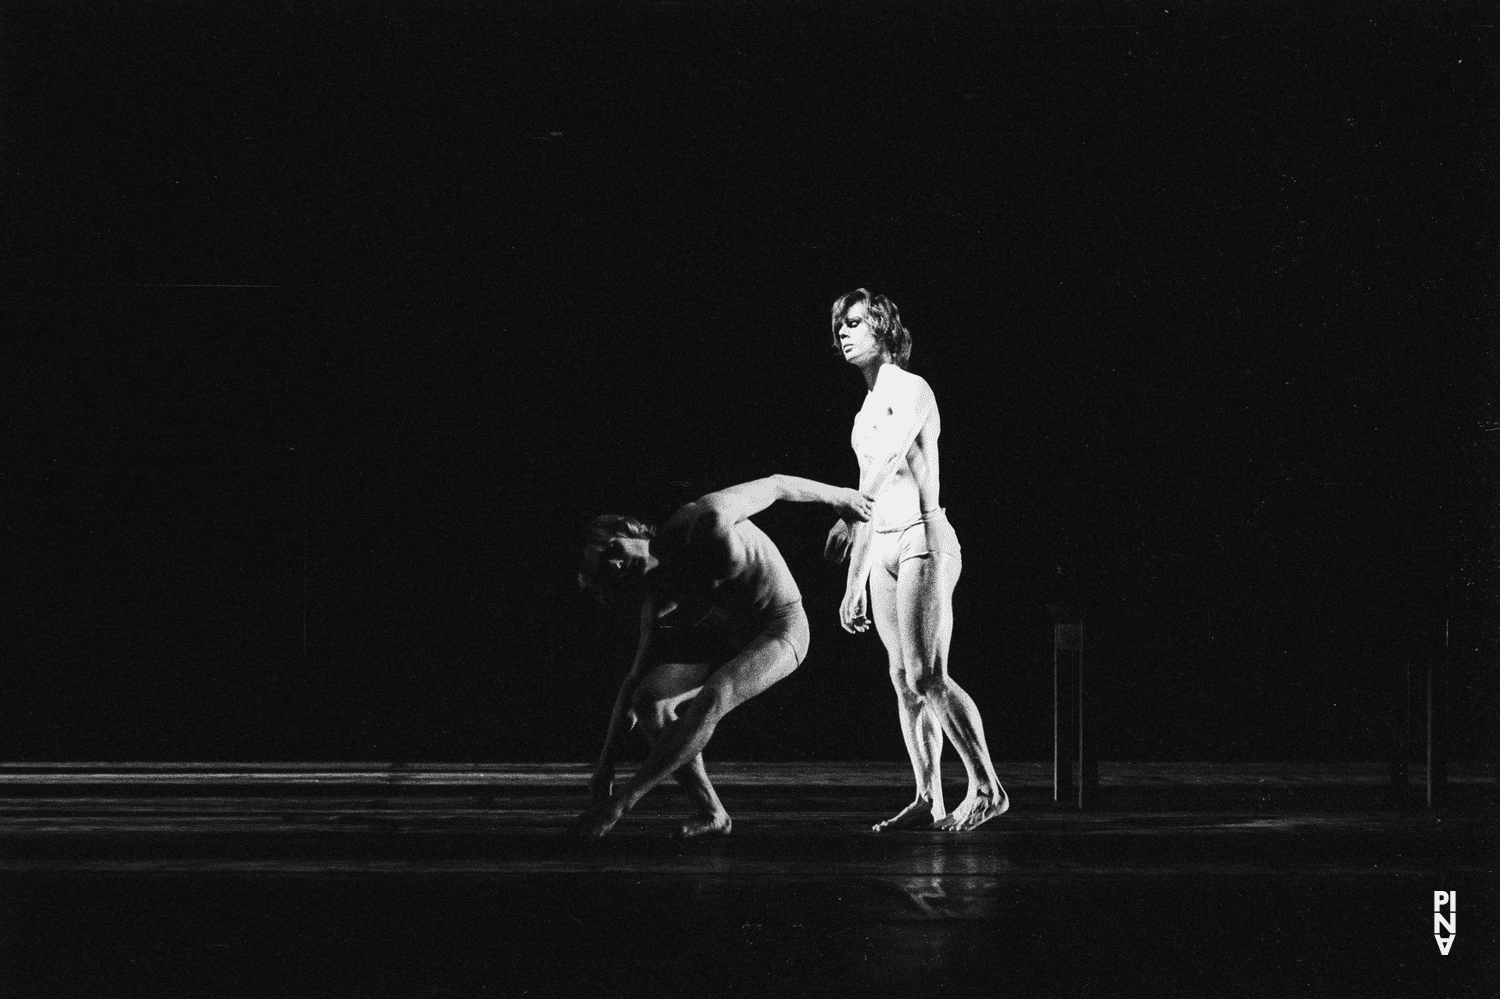 Dominique Mercy and Ed Kortlandt in “Iphigenie auf Tauris” by Pina Bausch at Opernhaus Wuppertal, April 20, 1974